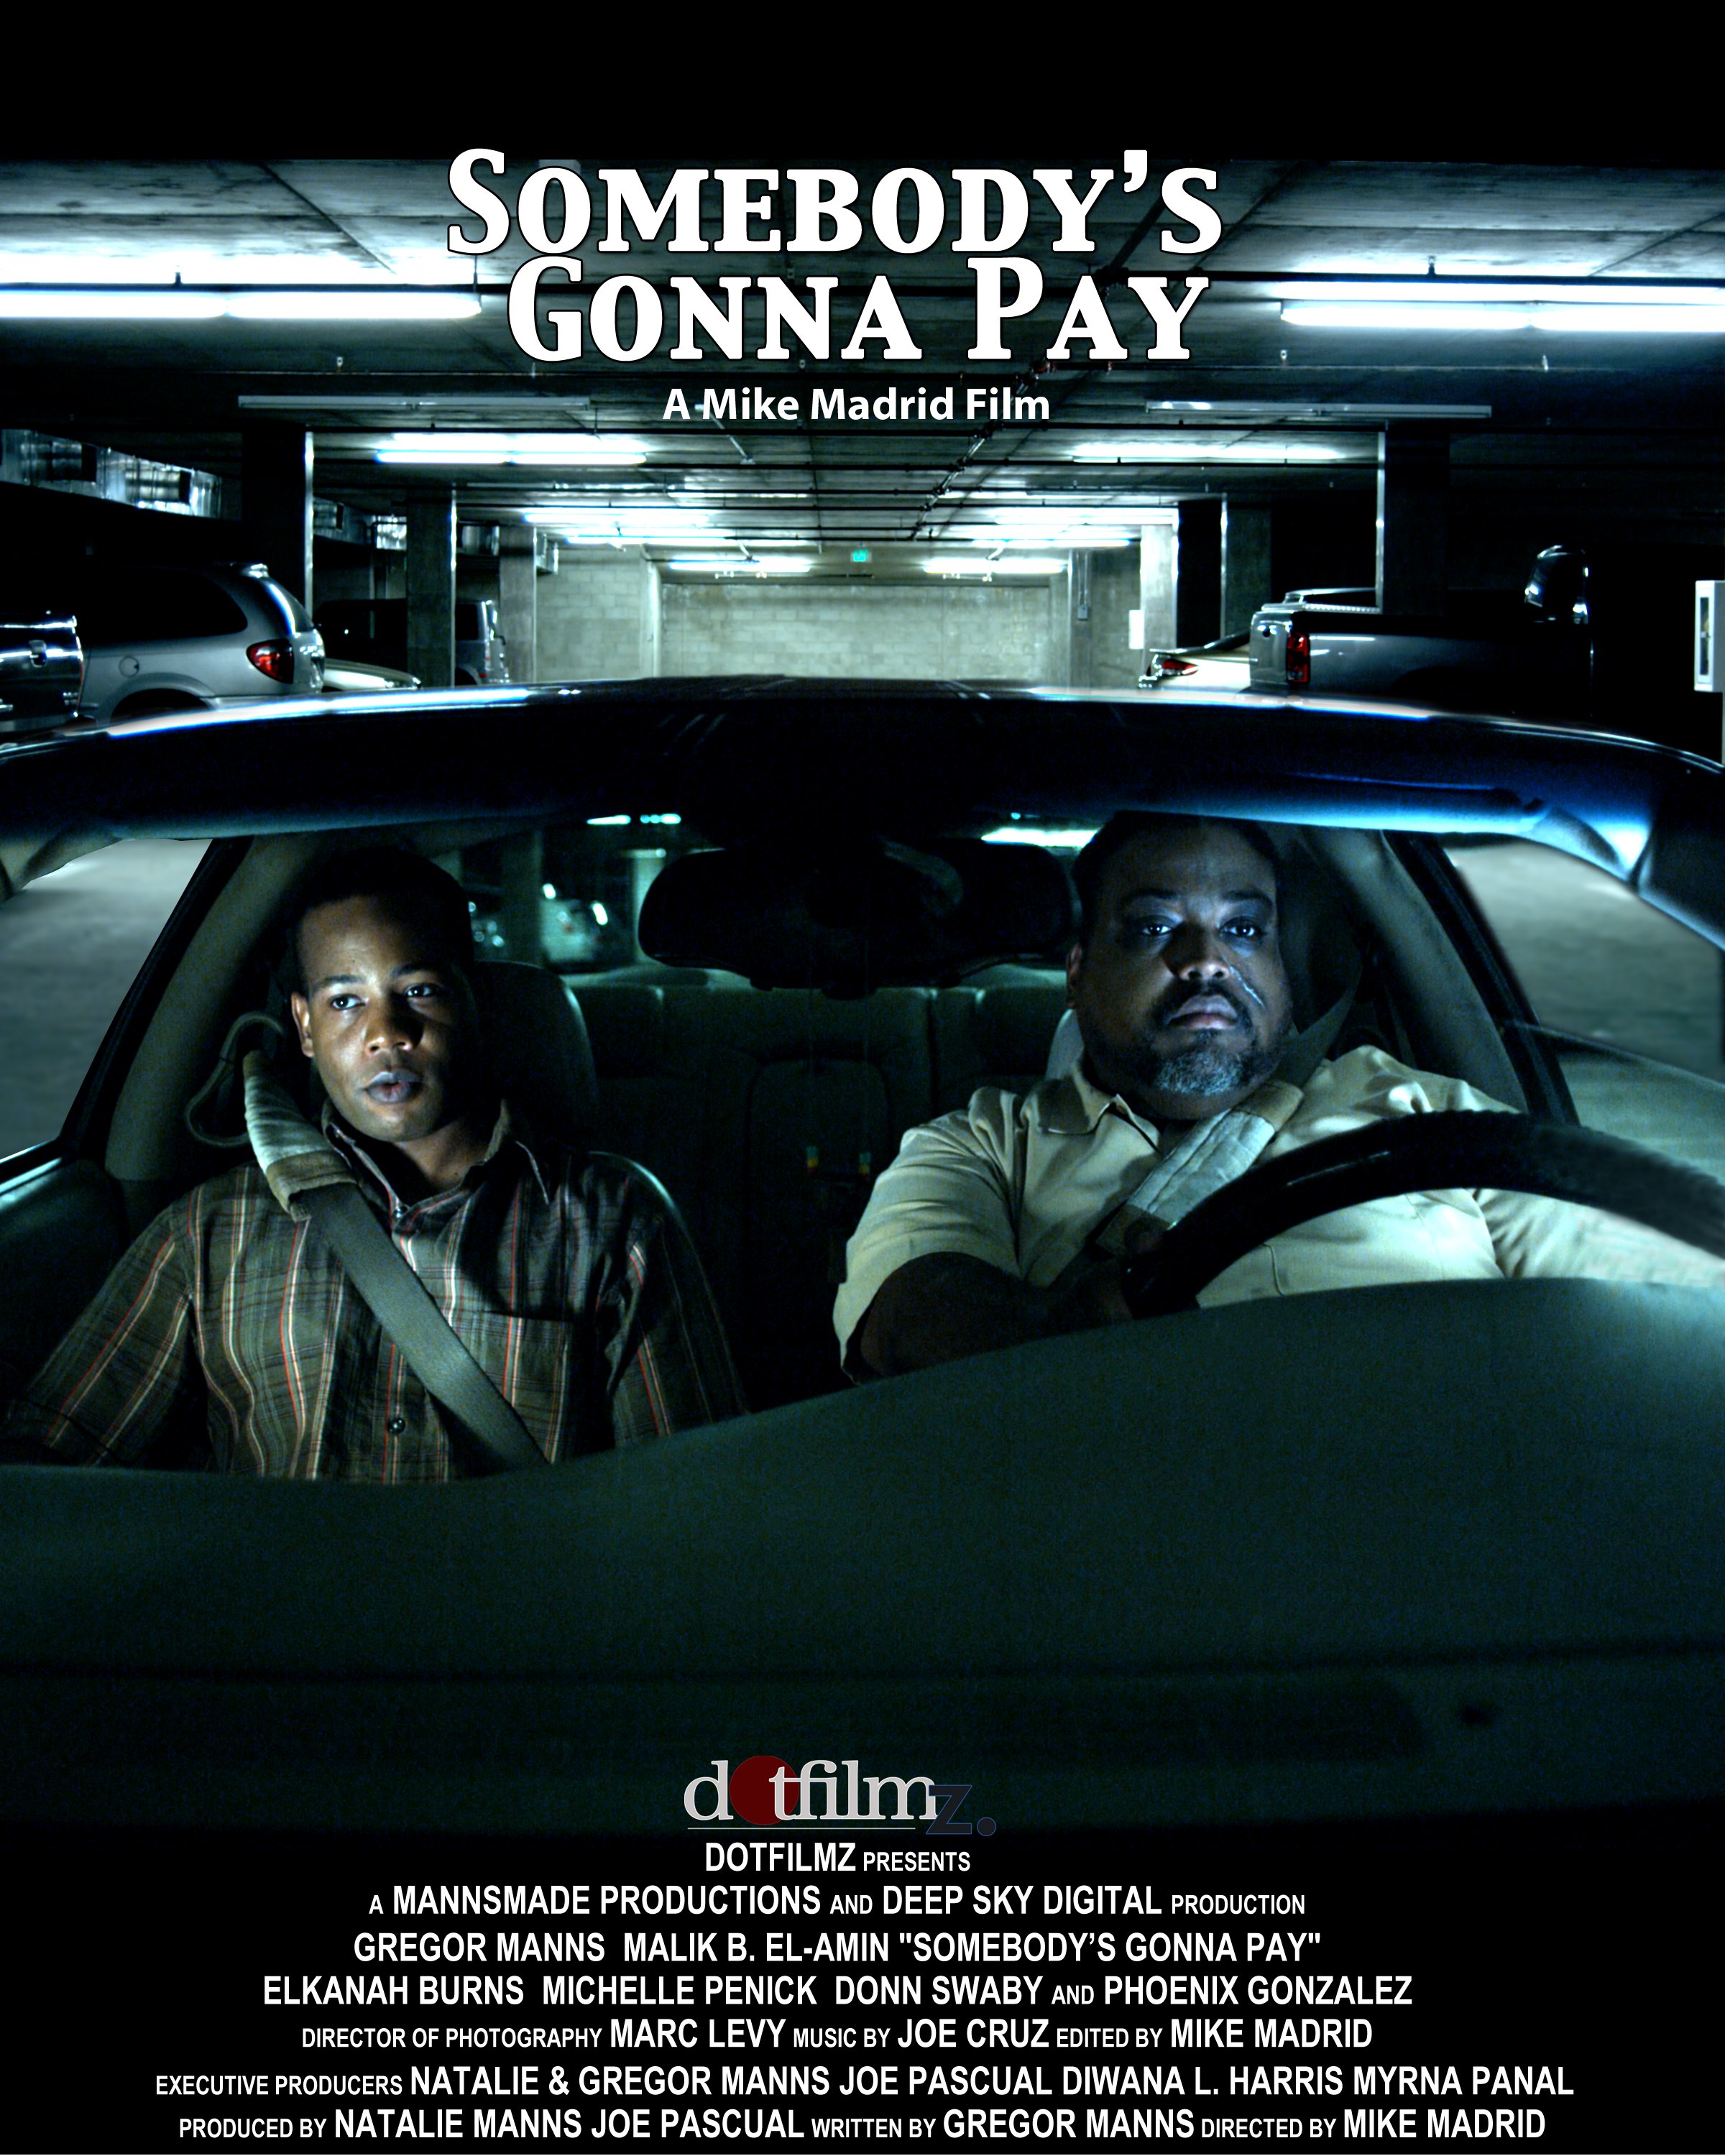 The official movie poster for the film short, 